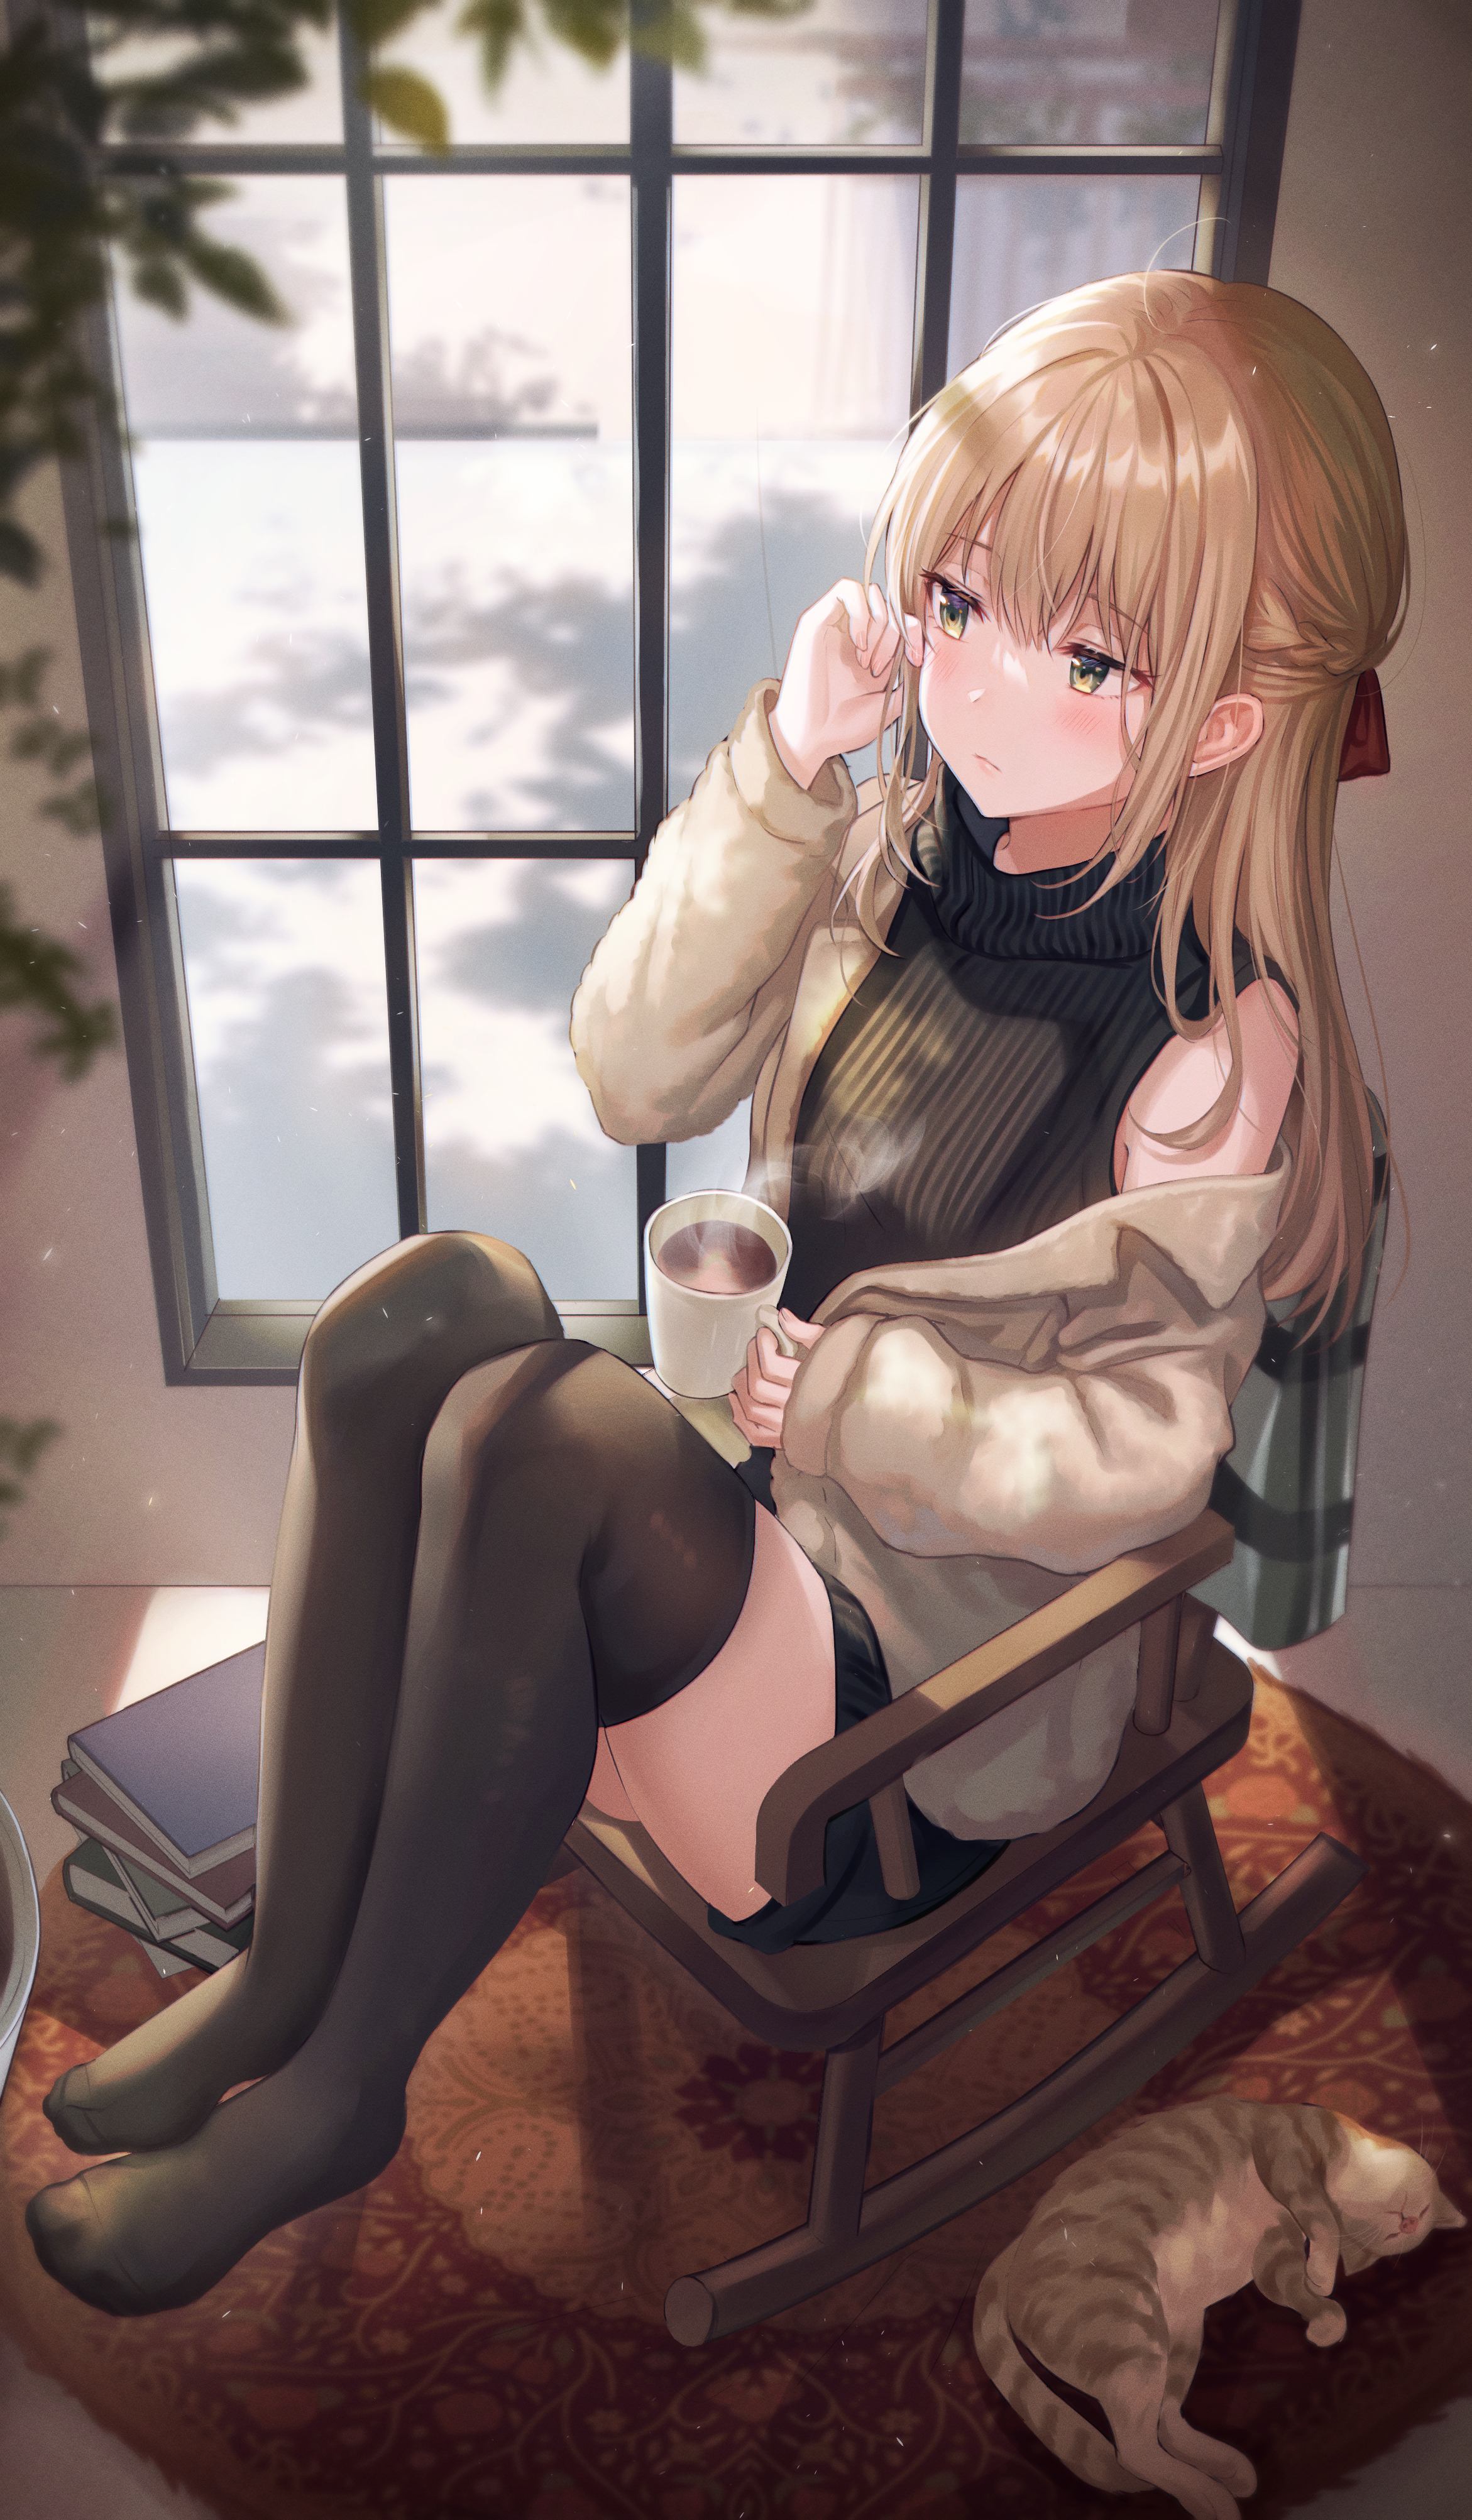 Anime Anime Girls Indoors Window Blonde Sitting Cup Chair Cats Animals Mammals Legs Knees Together T 2342x4010